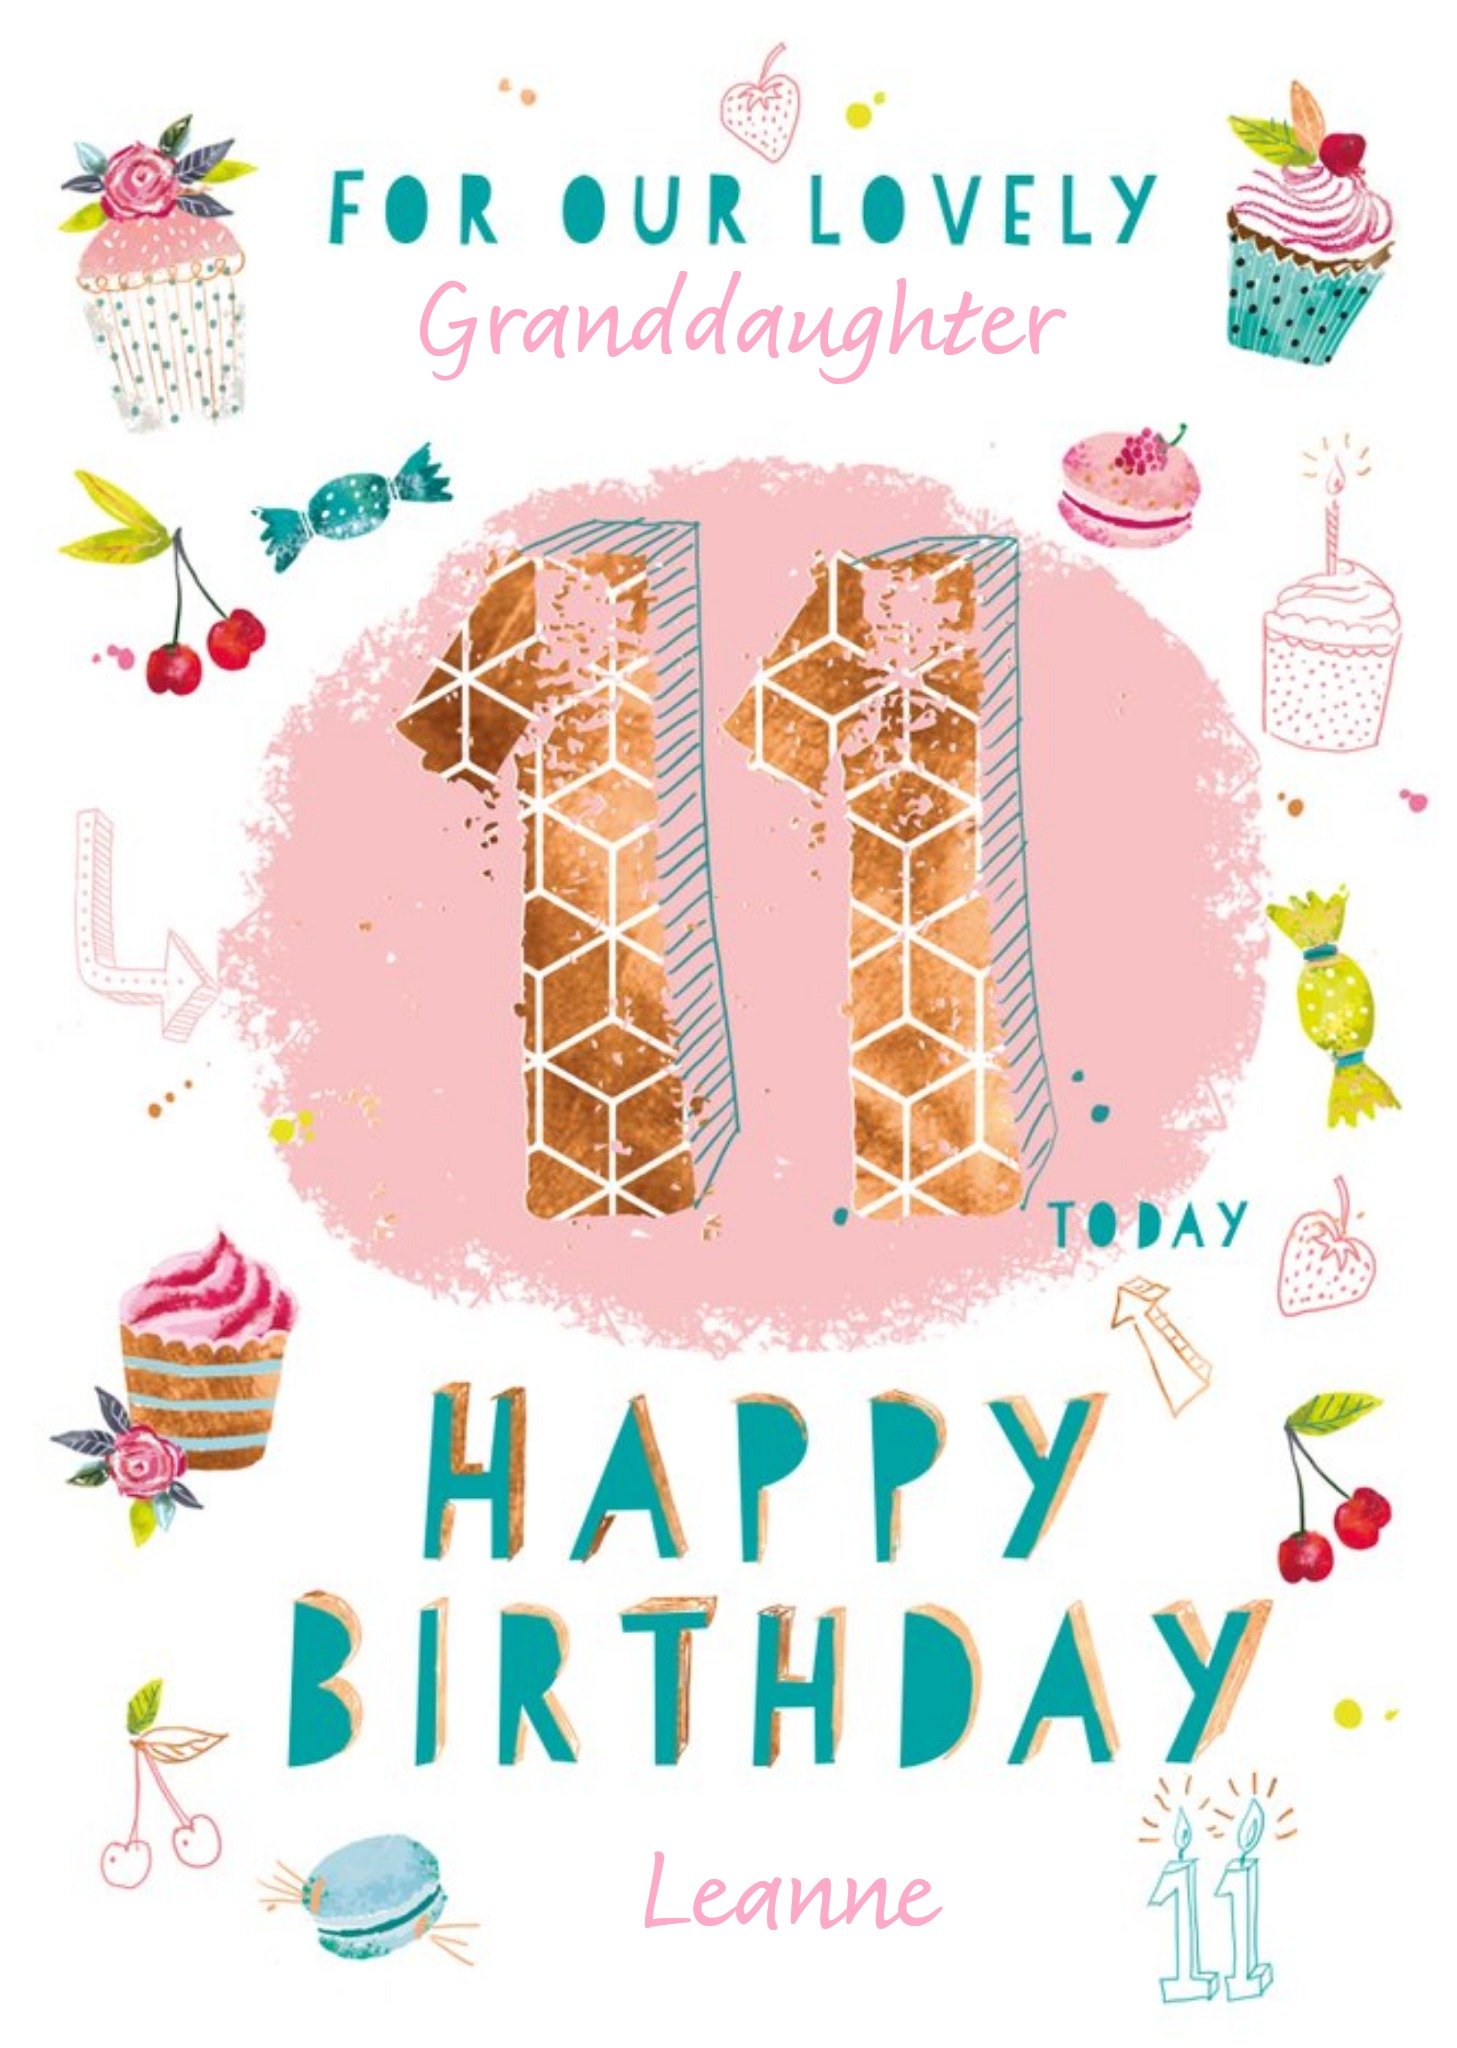 Ling Design Illustration Of Cupcakes Sweets And Other Treats Granddaughter's Eleventh Birthday Card 